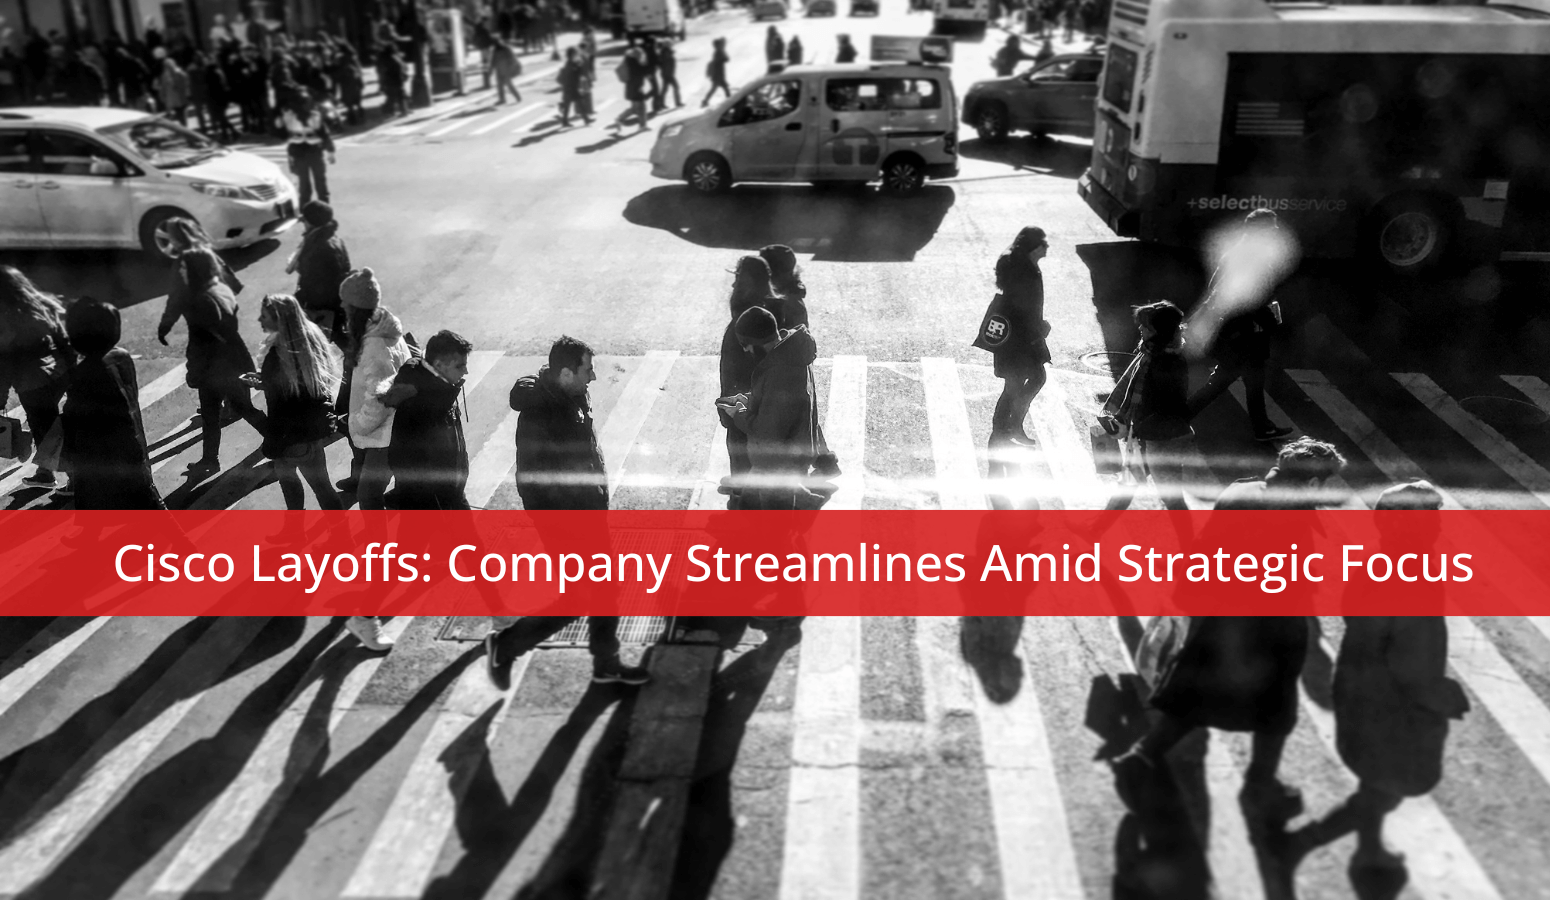 Featured image for “Cisco Layoffs: Company Streamlines Amid Strategic Focus”